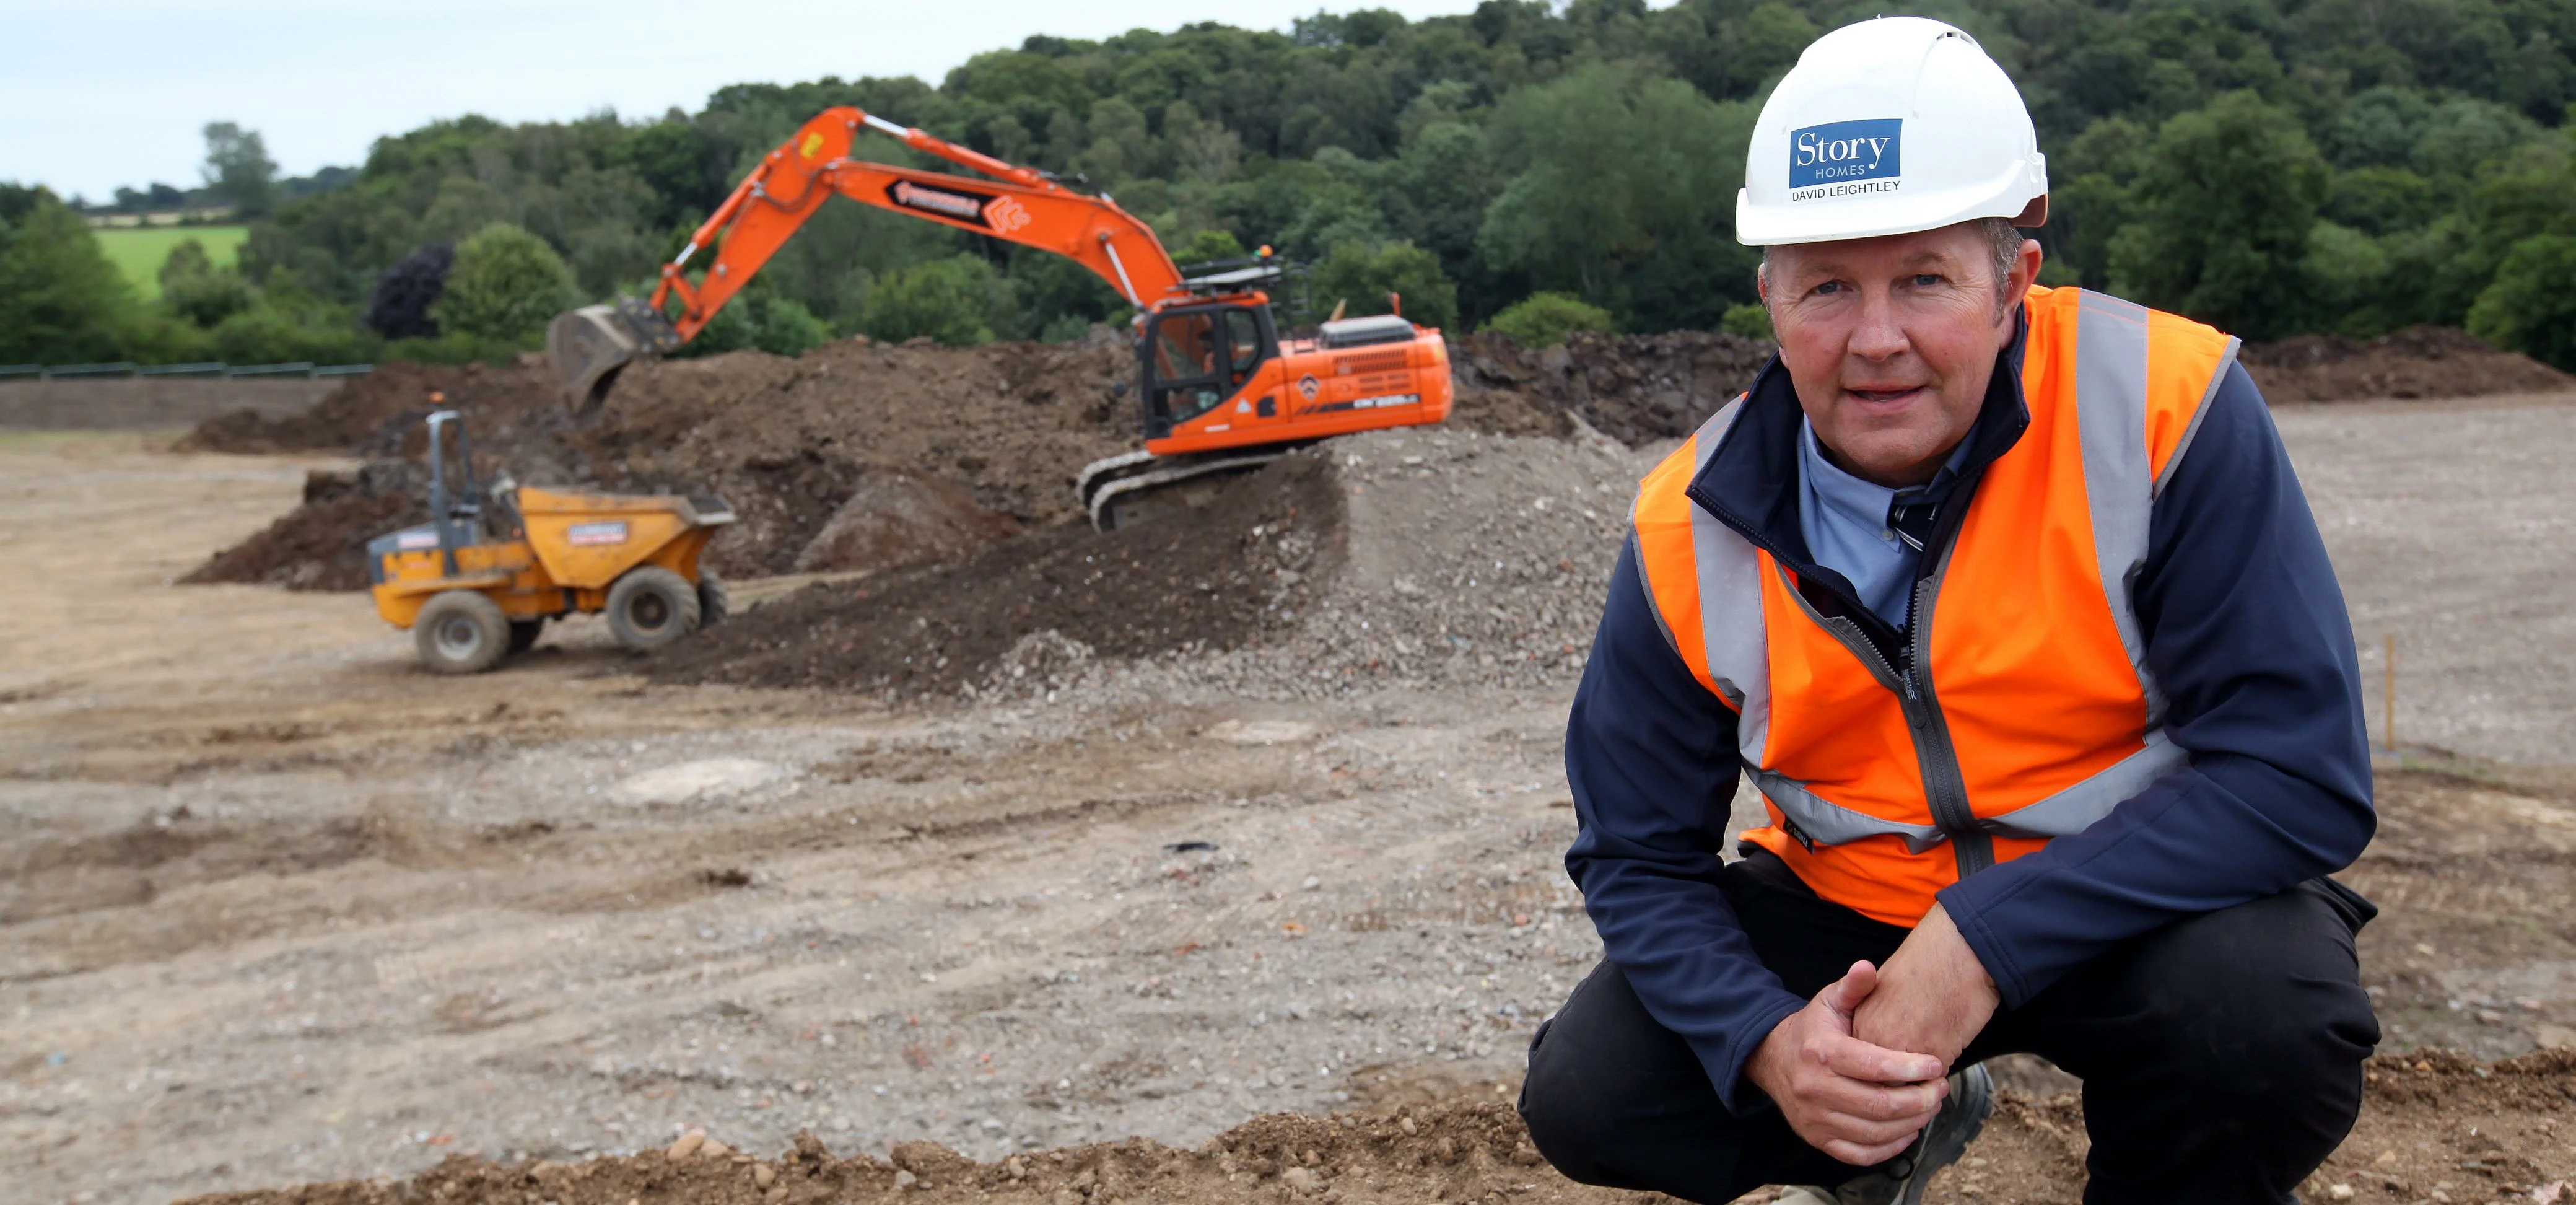 Story Homes site manager starts work on site at Morpeth